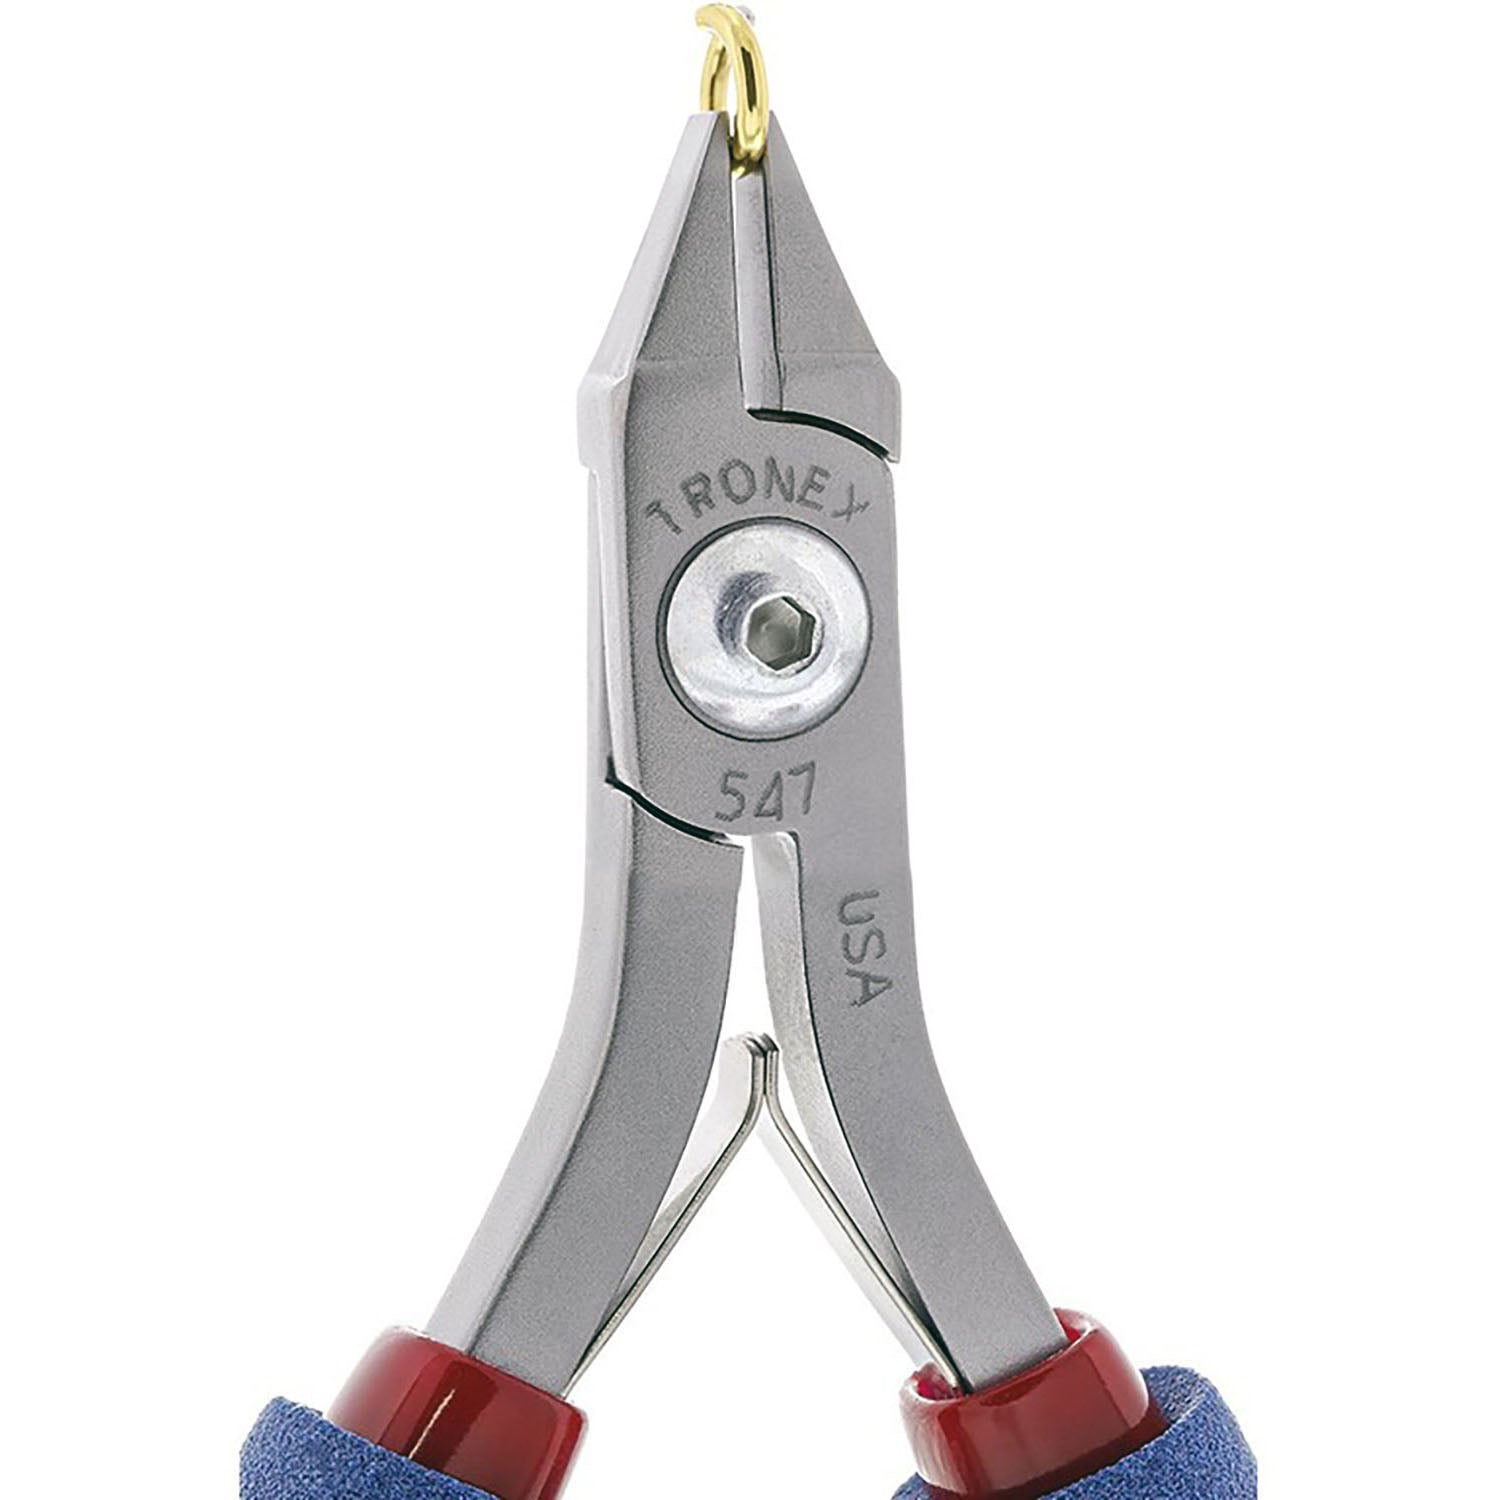 Tronex P742S Flat Nose Pliers Wide Step Tips with Long, Serrated Jaw